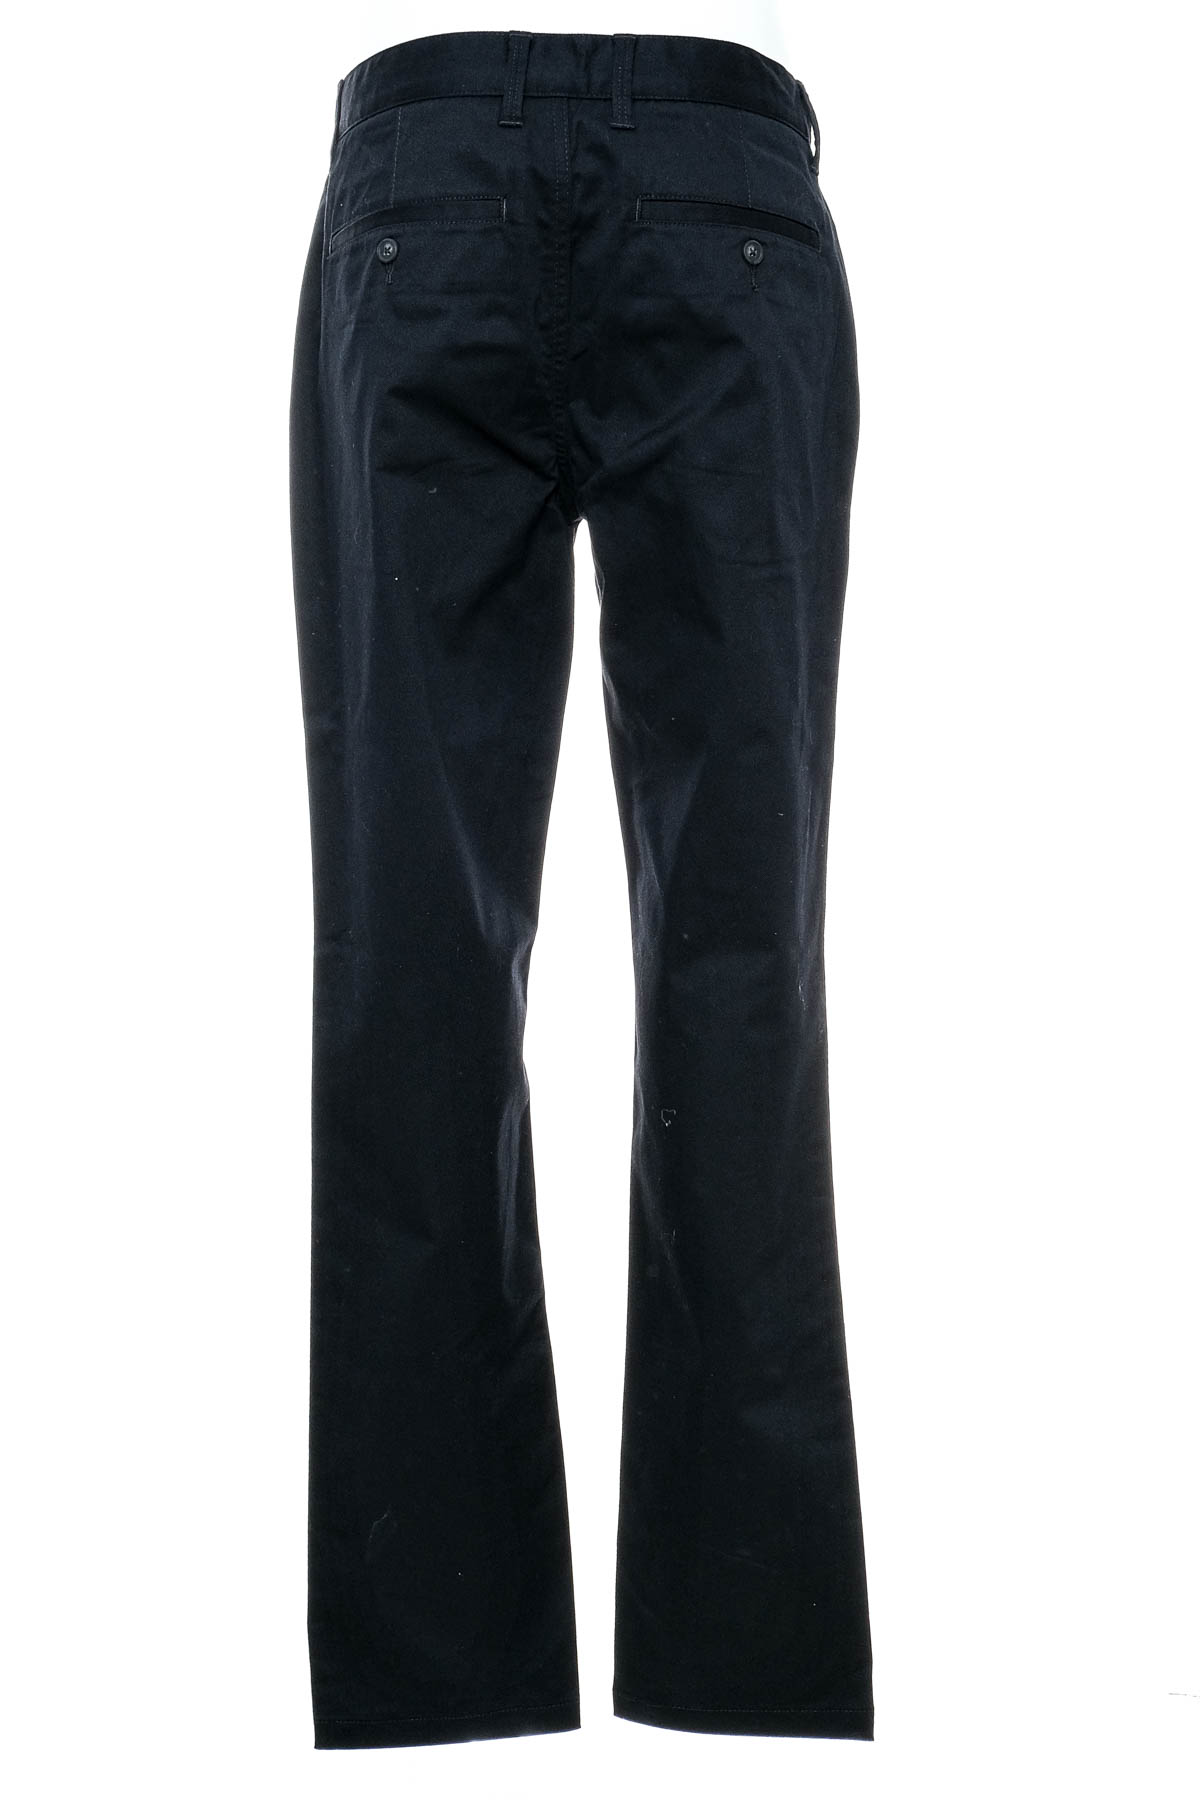 Men's trousers - Designs To You - 1